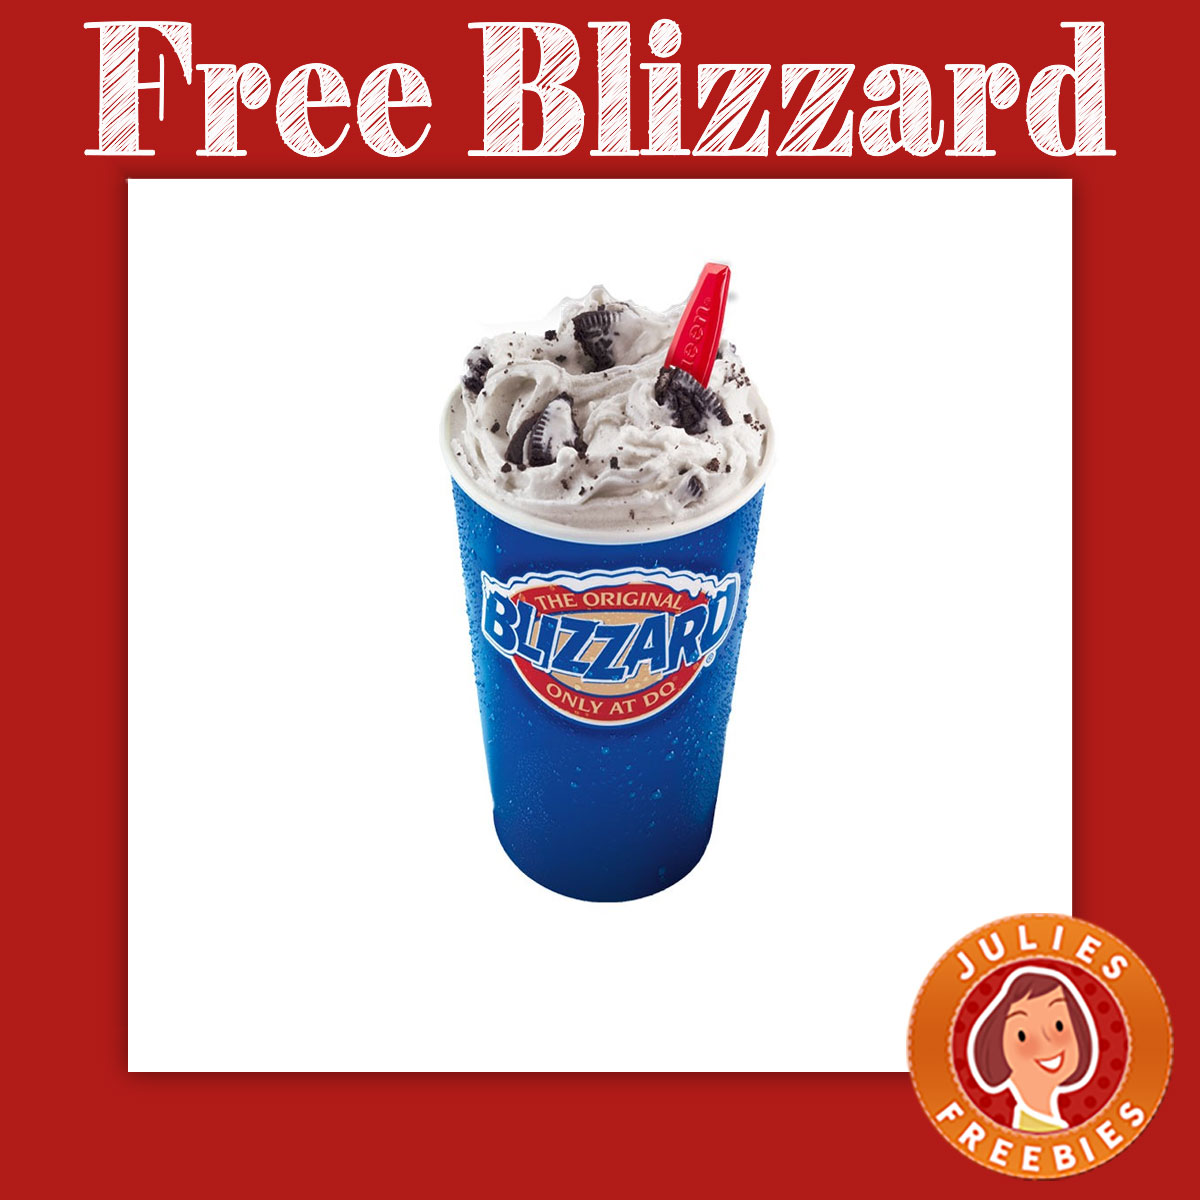 Free Small Blizzard at Dairy Queen Julie's Freebies